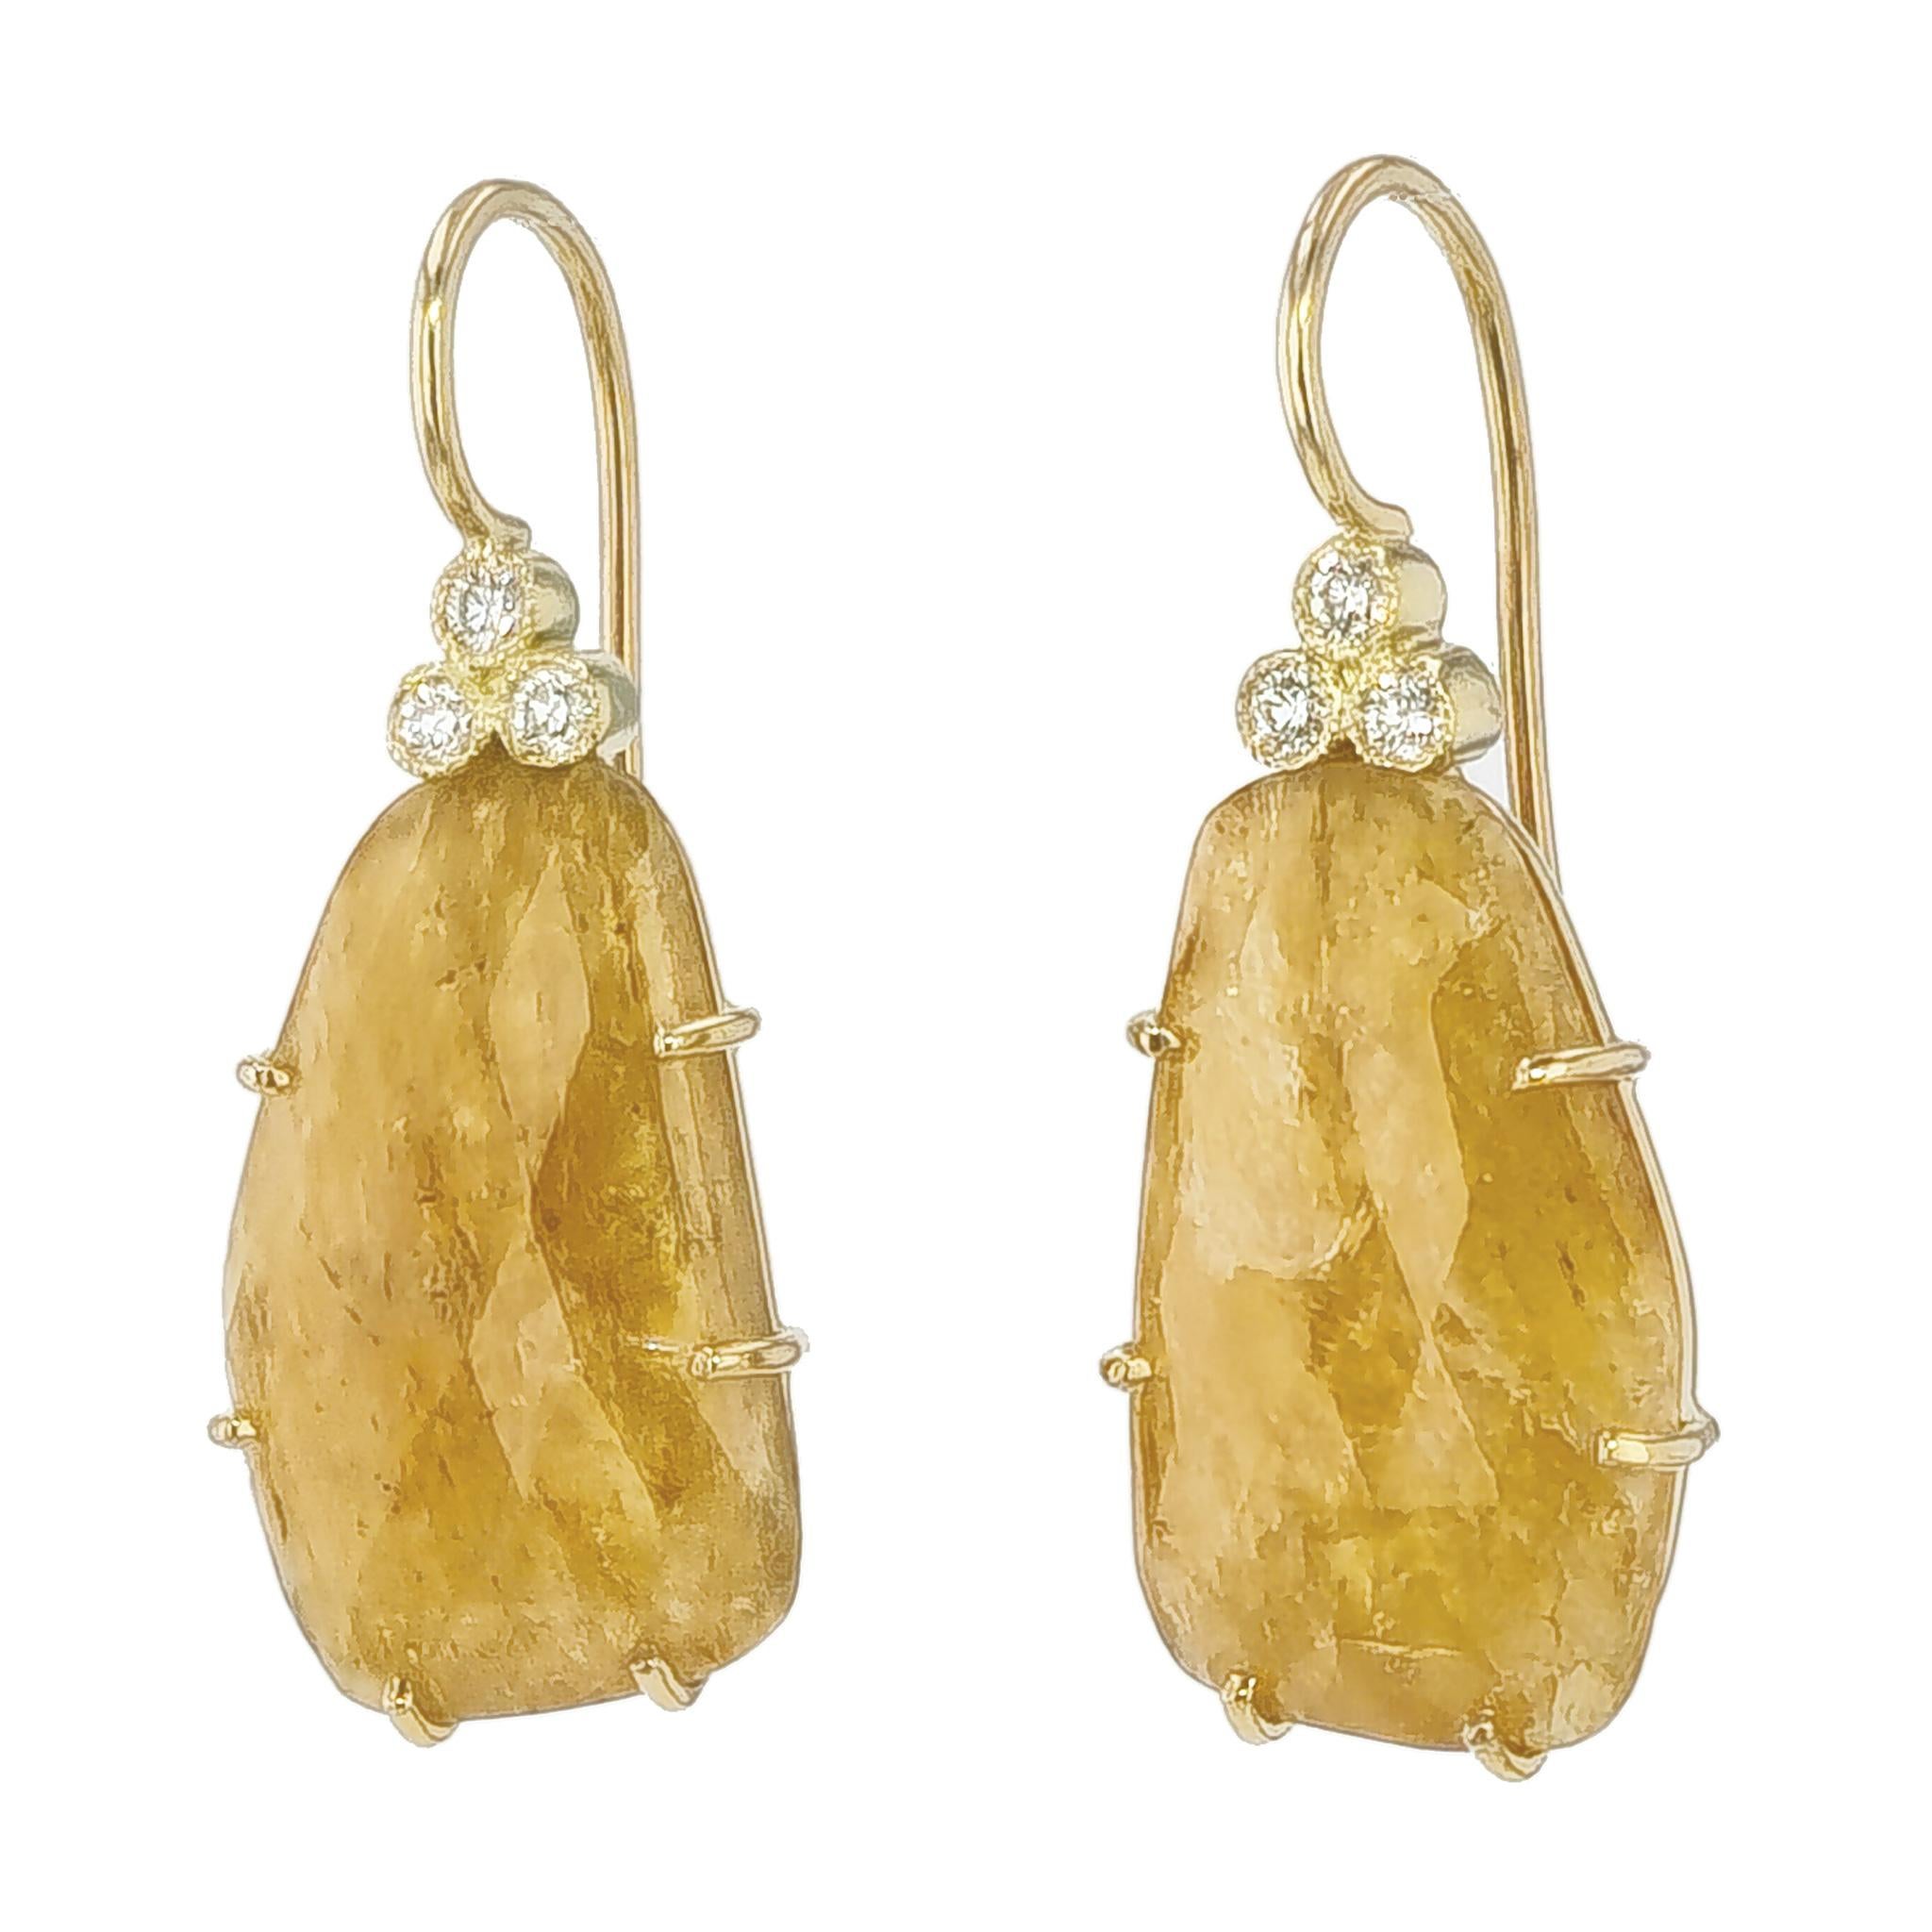 These stunning Yellow Gold Drop Earrings are handmade from the H&H Collection. 

Each pair contains two natural yellow sapphire slices with a total carat weight of 13.93ct, 6 cut round brilliant diamonds with a color grade of G-H and clarity grade